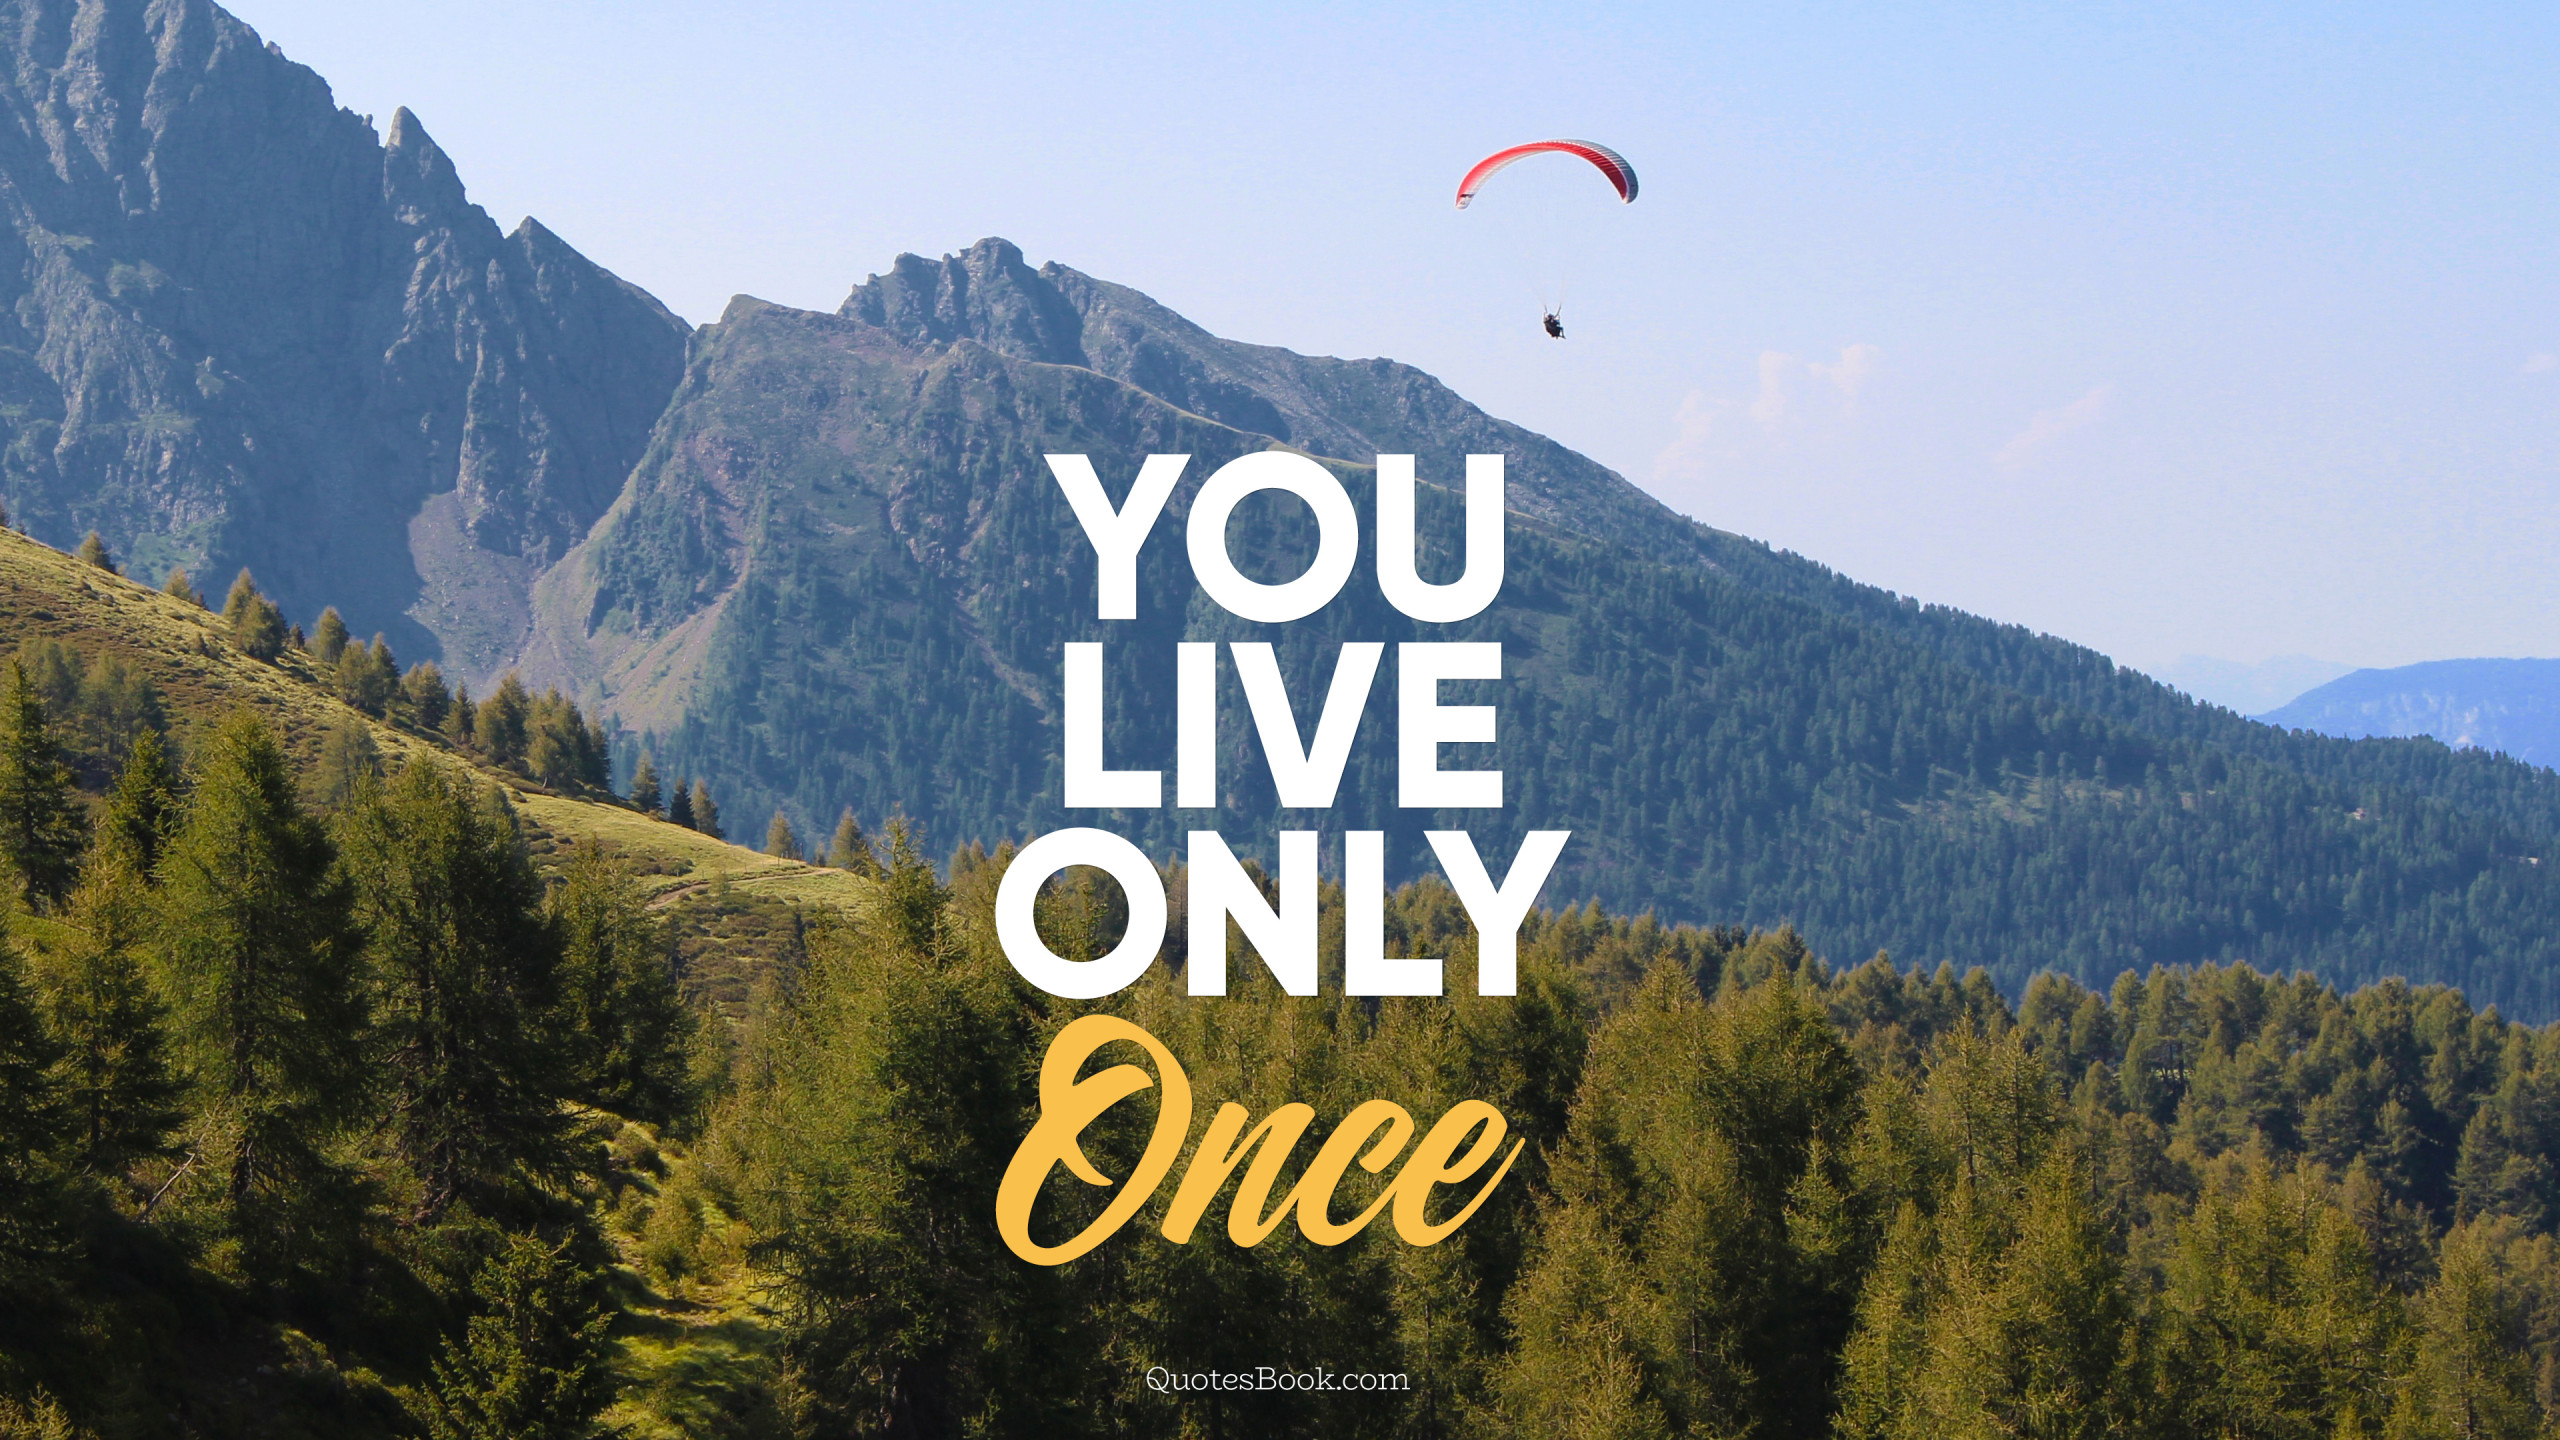 You live only once - QuotesBook